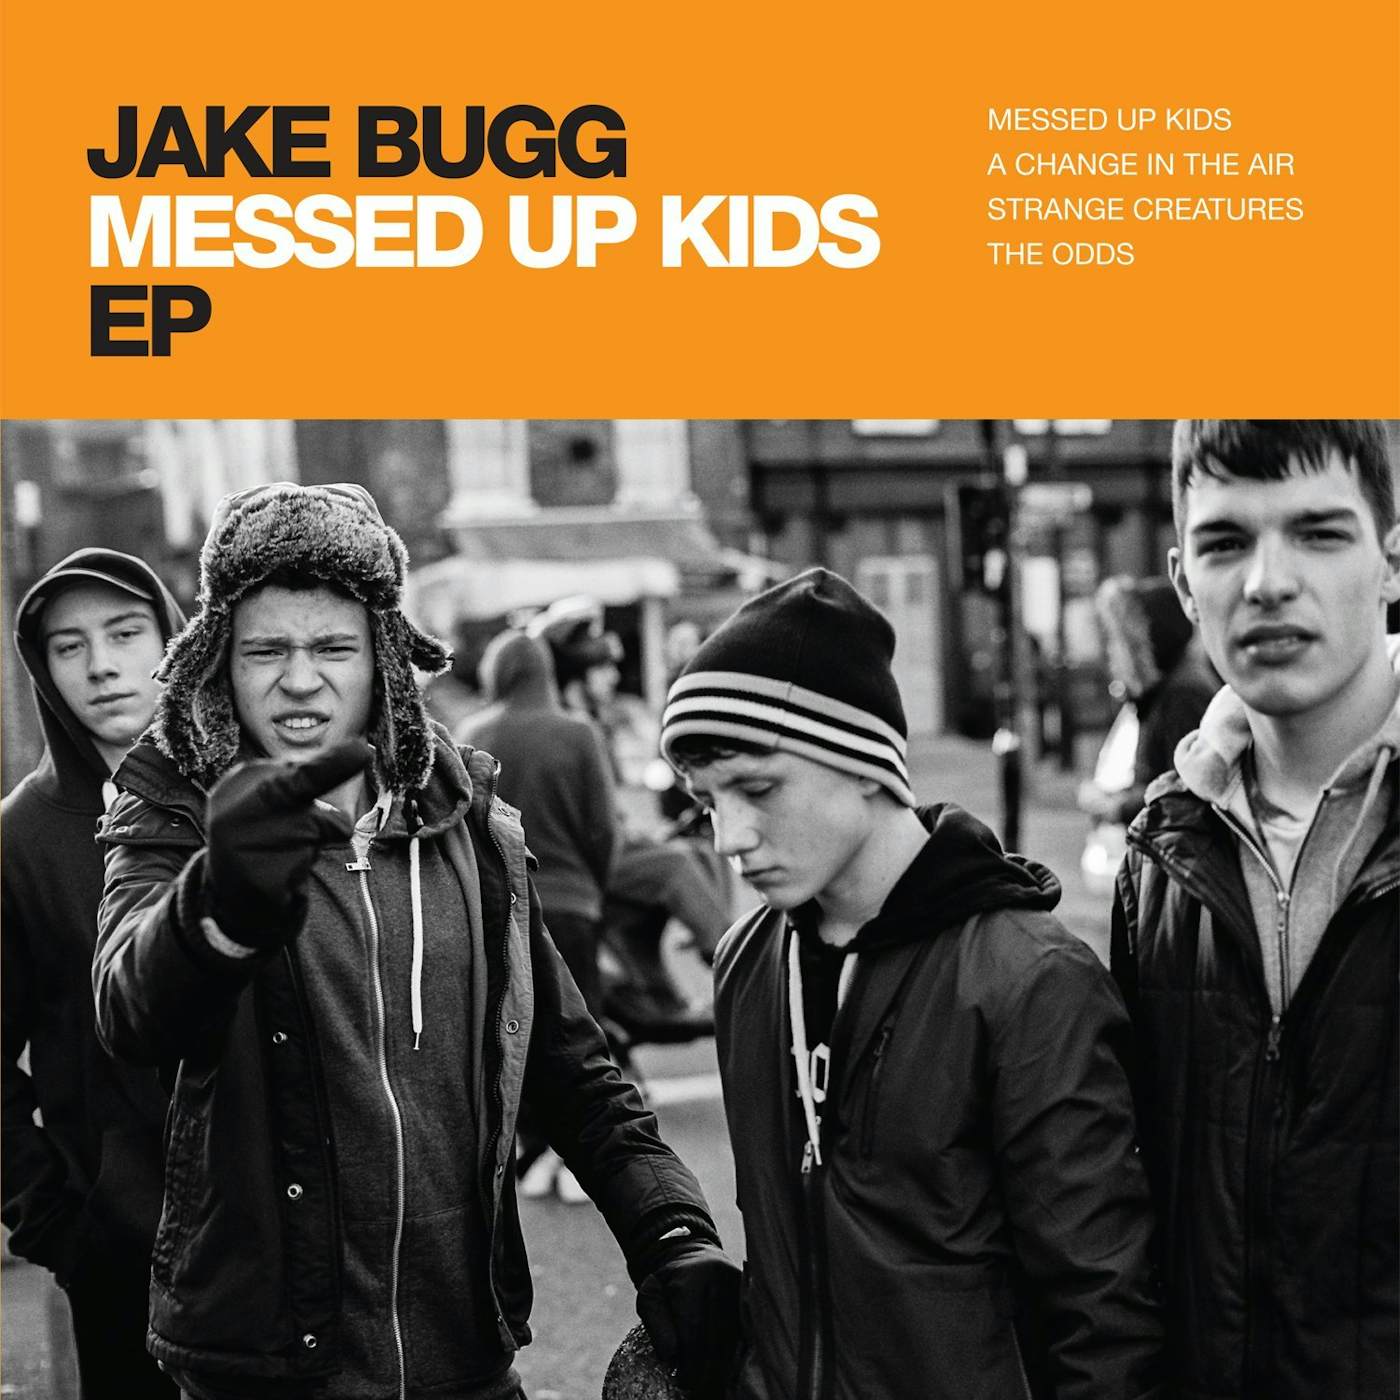 Jake Bugg MESSED UP KIDS Vinyl Record - Holland Release